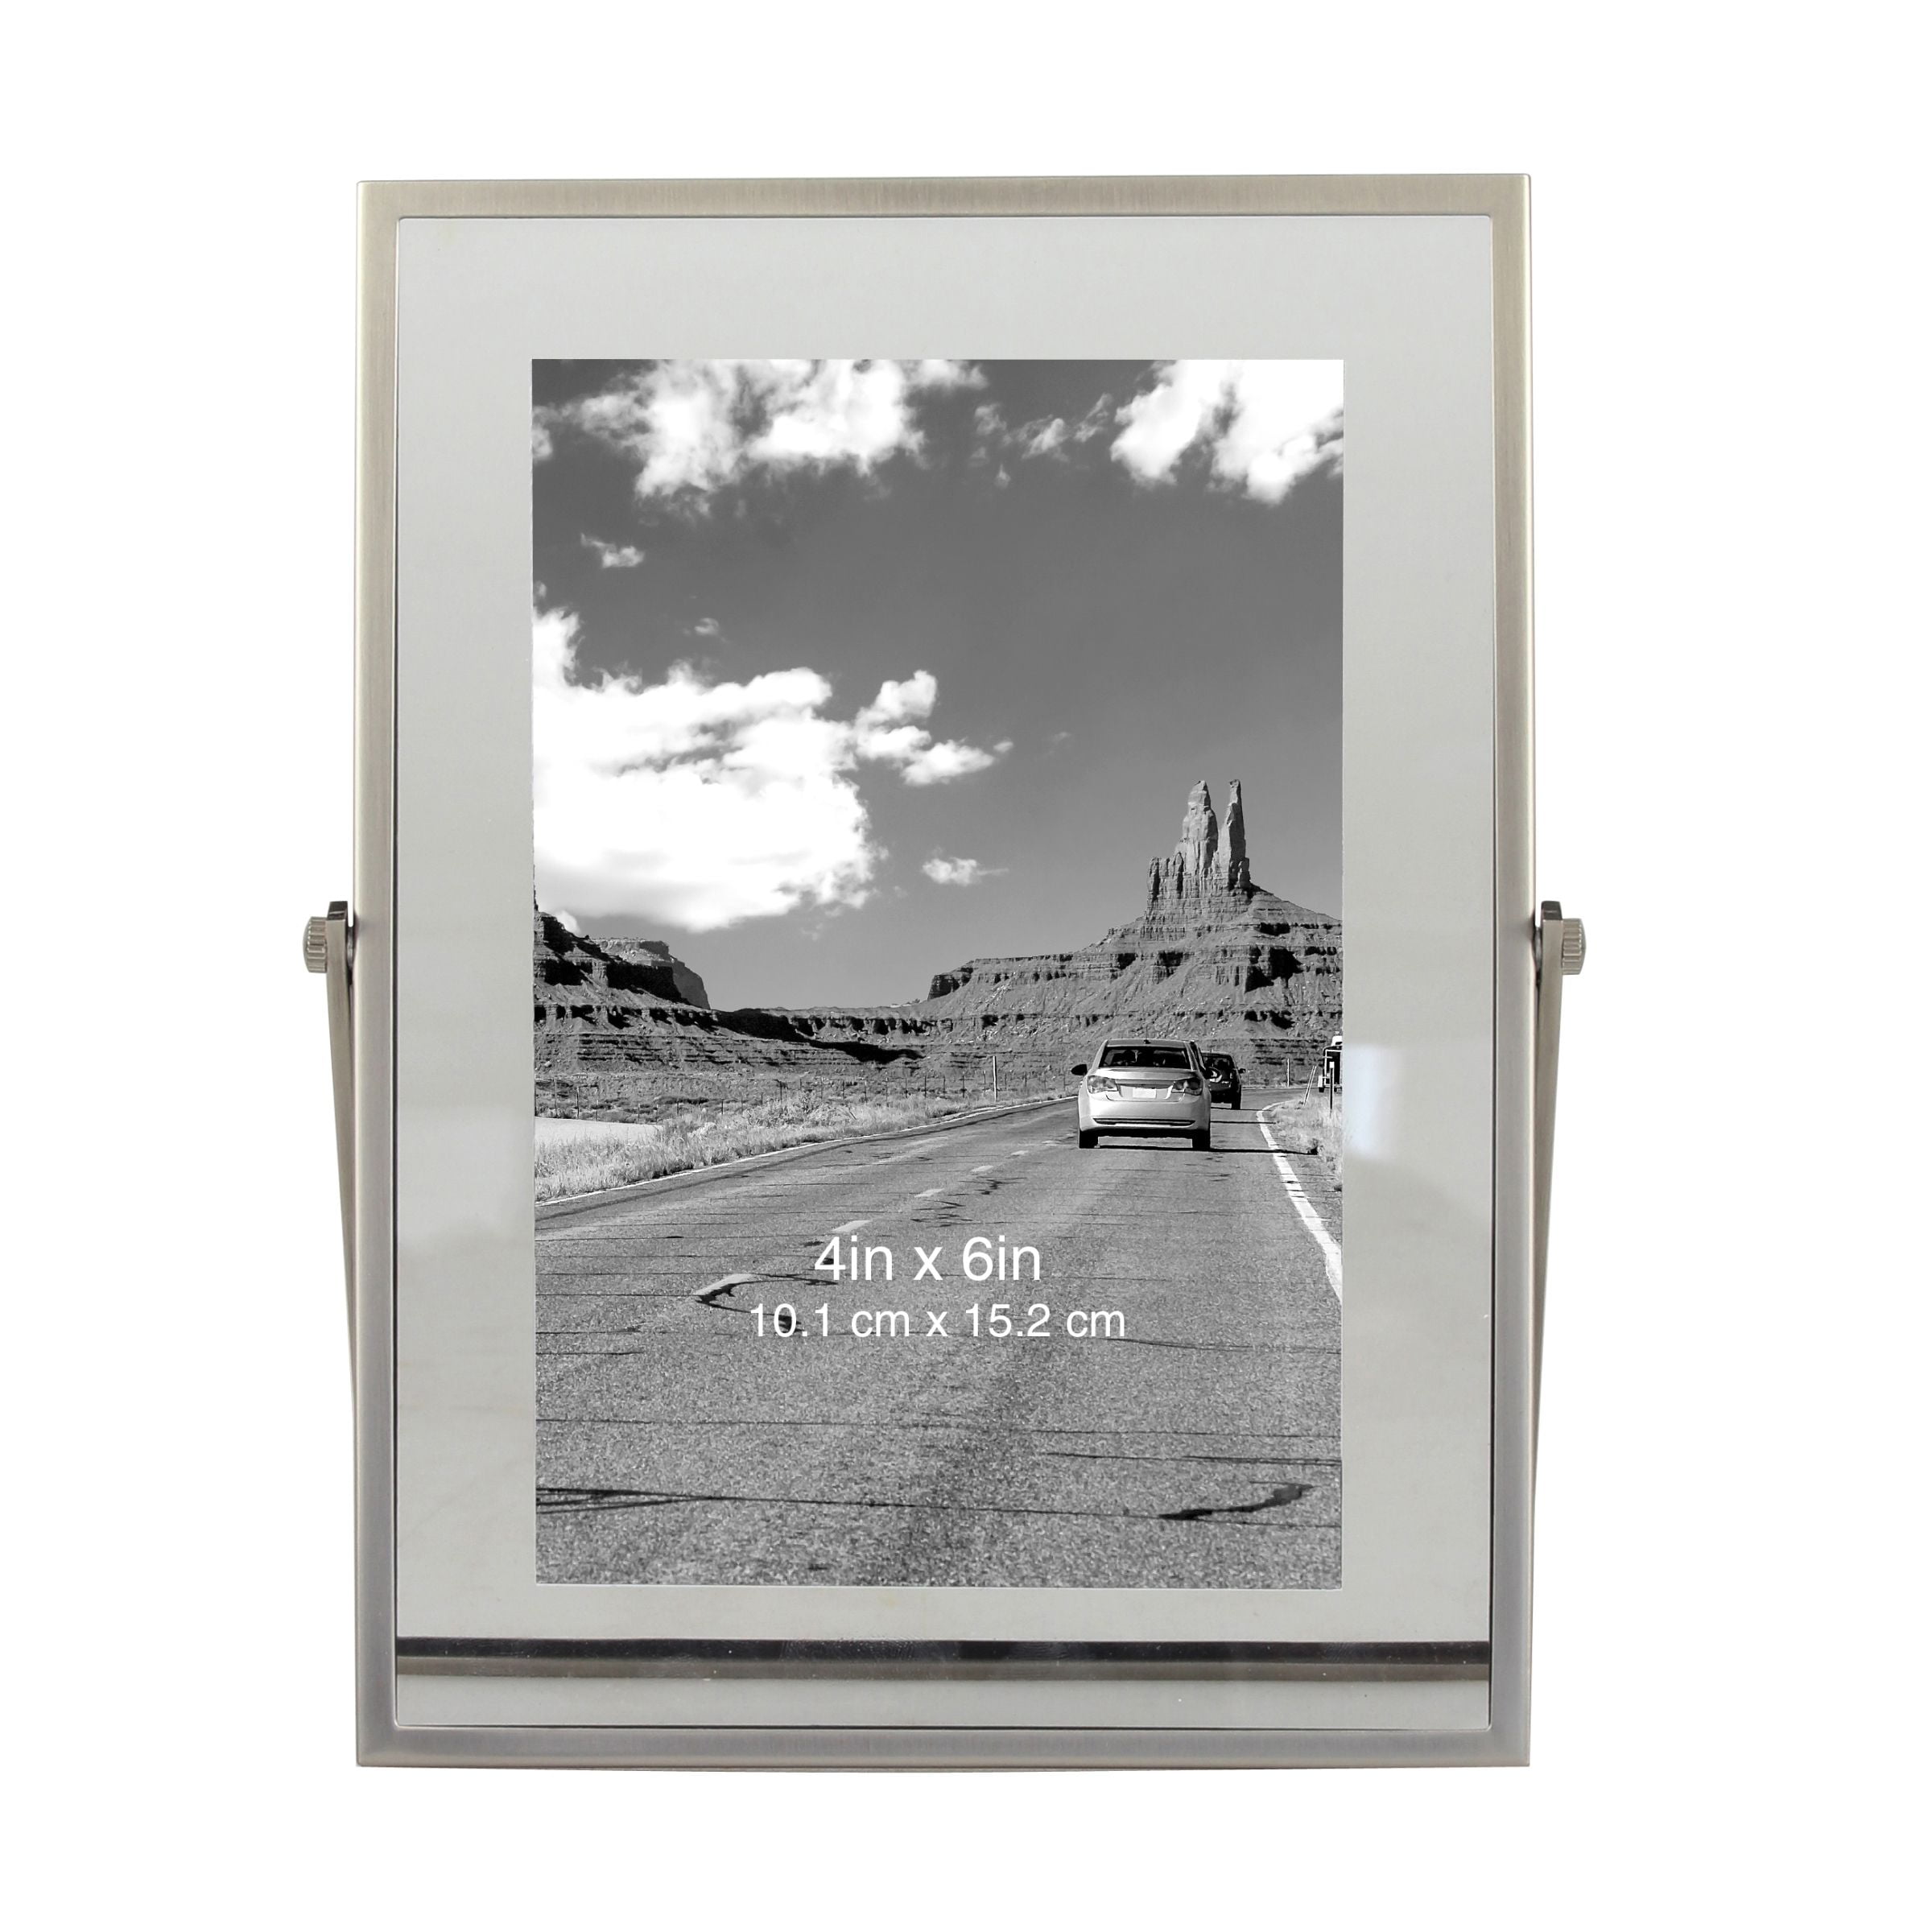 Gold or White Standoff Hardware Comes with Choice of Black Chrome 16x18 Double Panel Floating Acrylic Frame for 12x14 Inch Art and Photos